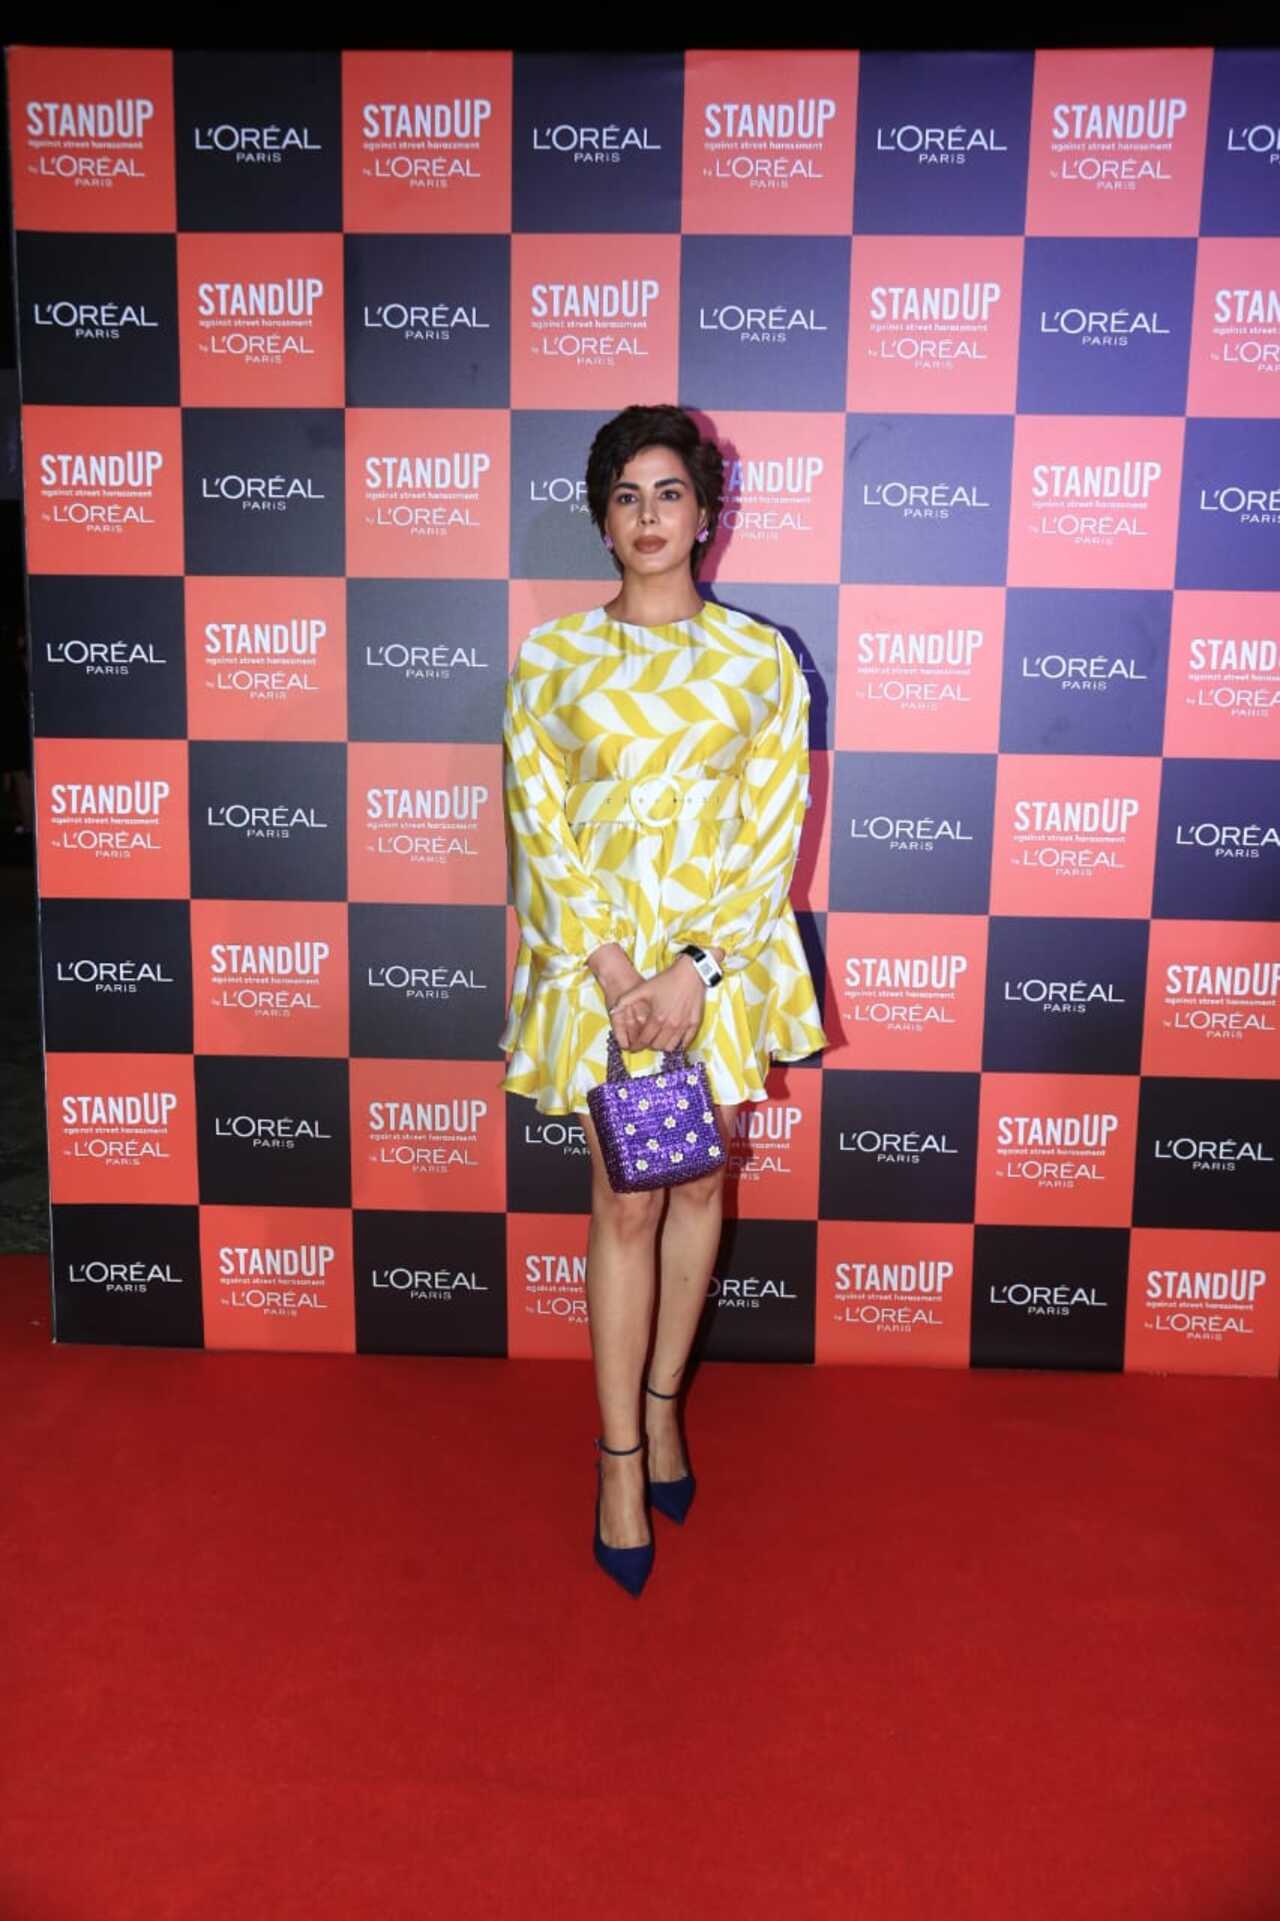 Kirti Kulhari's short hair went well with her yellow dress and pointed toe heels